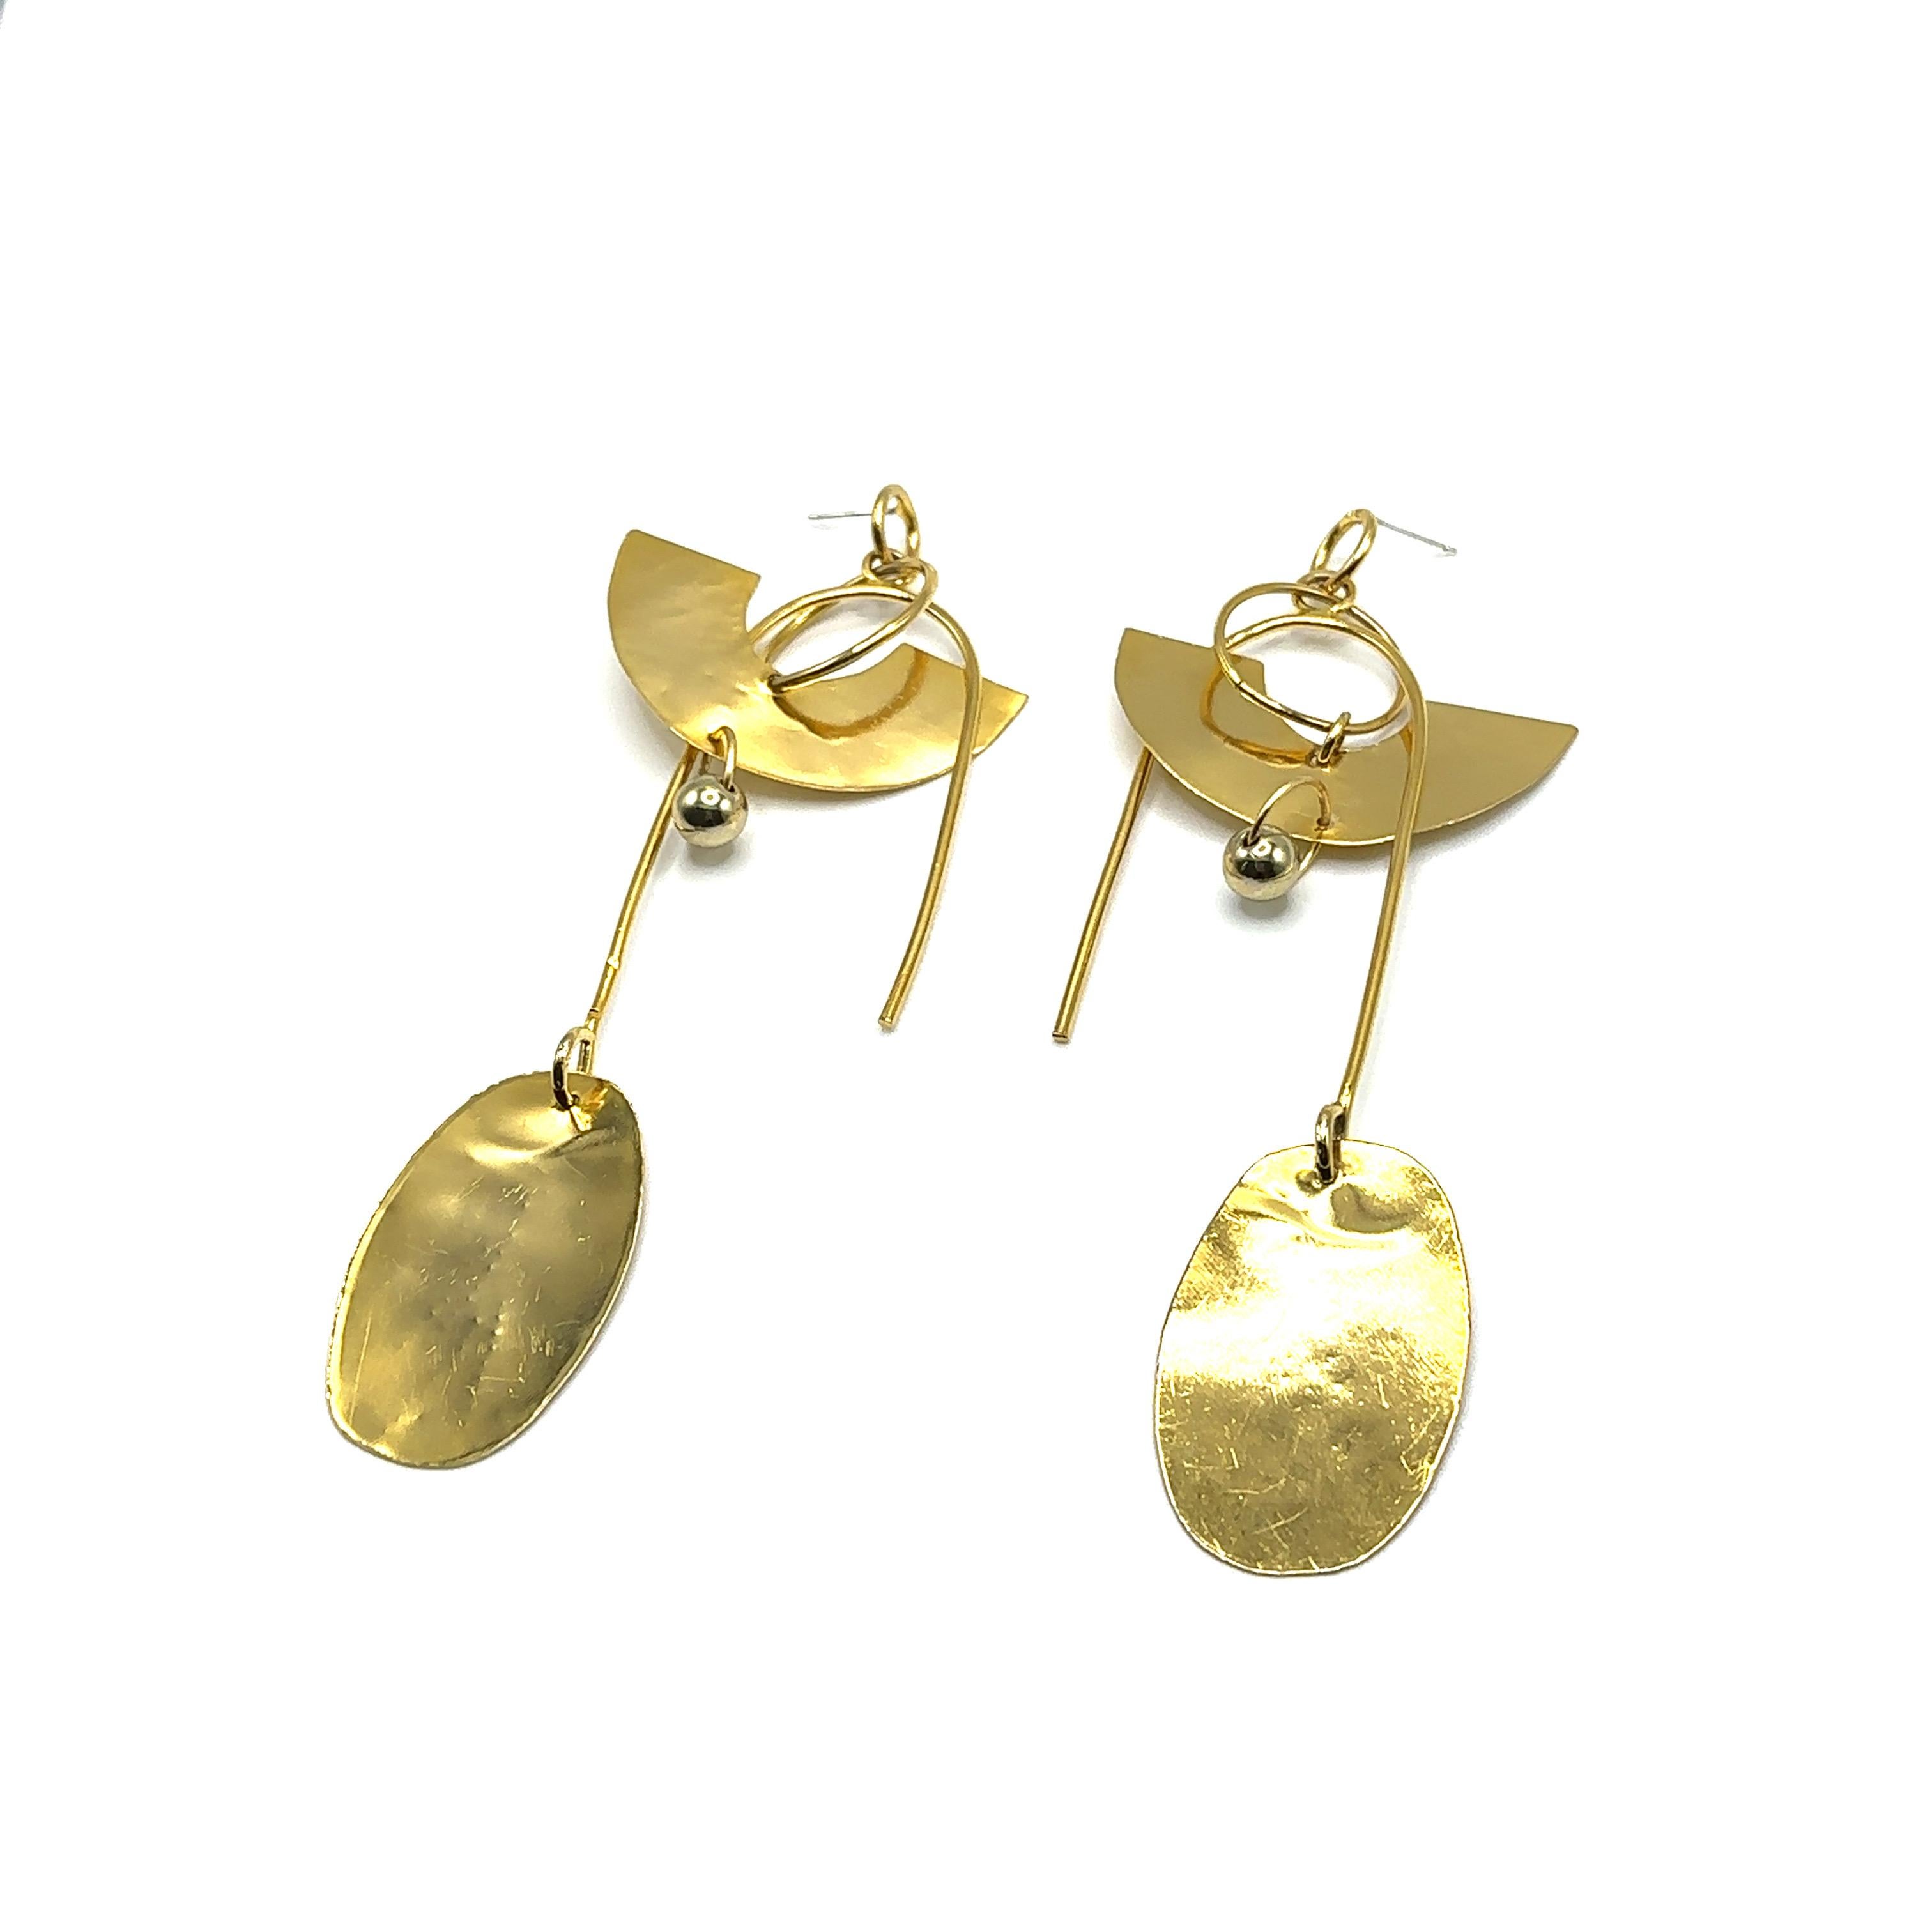 From refined, timeless shapes to modern characters with edge meet NIKKI - handcrafted and shape may vary slightly making pieces one of a kind Material 14K Gold Plated

Nikki was inspired by the Artist Alexander Calder and playful idea of mobiles.